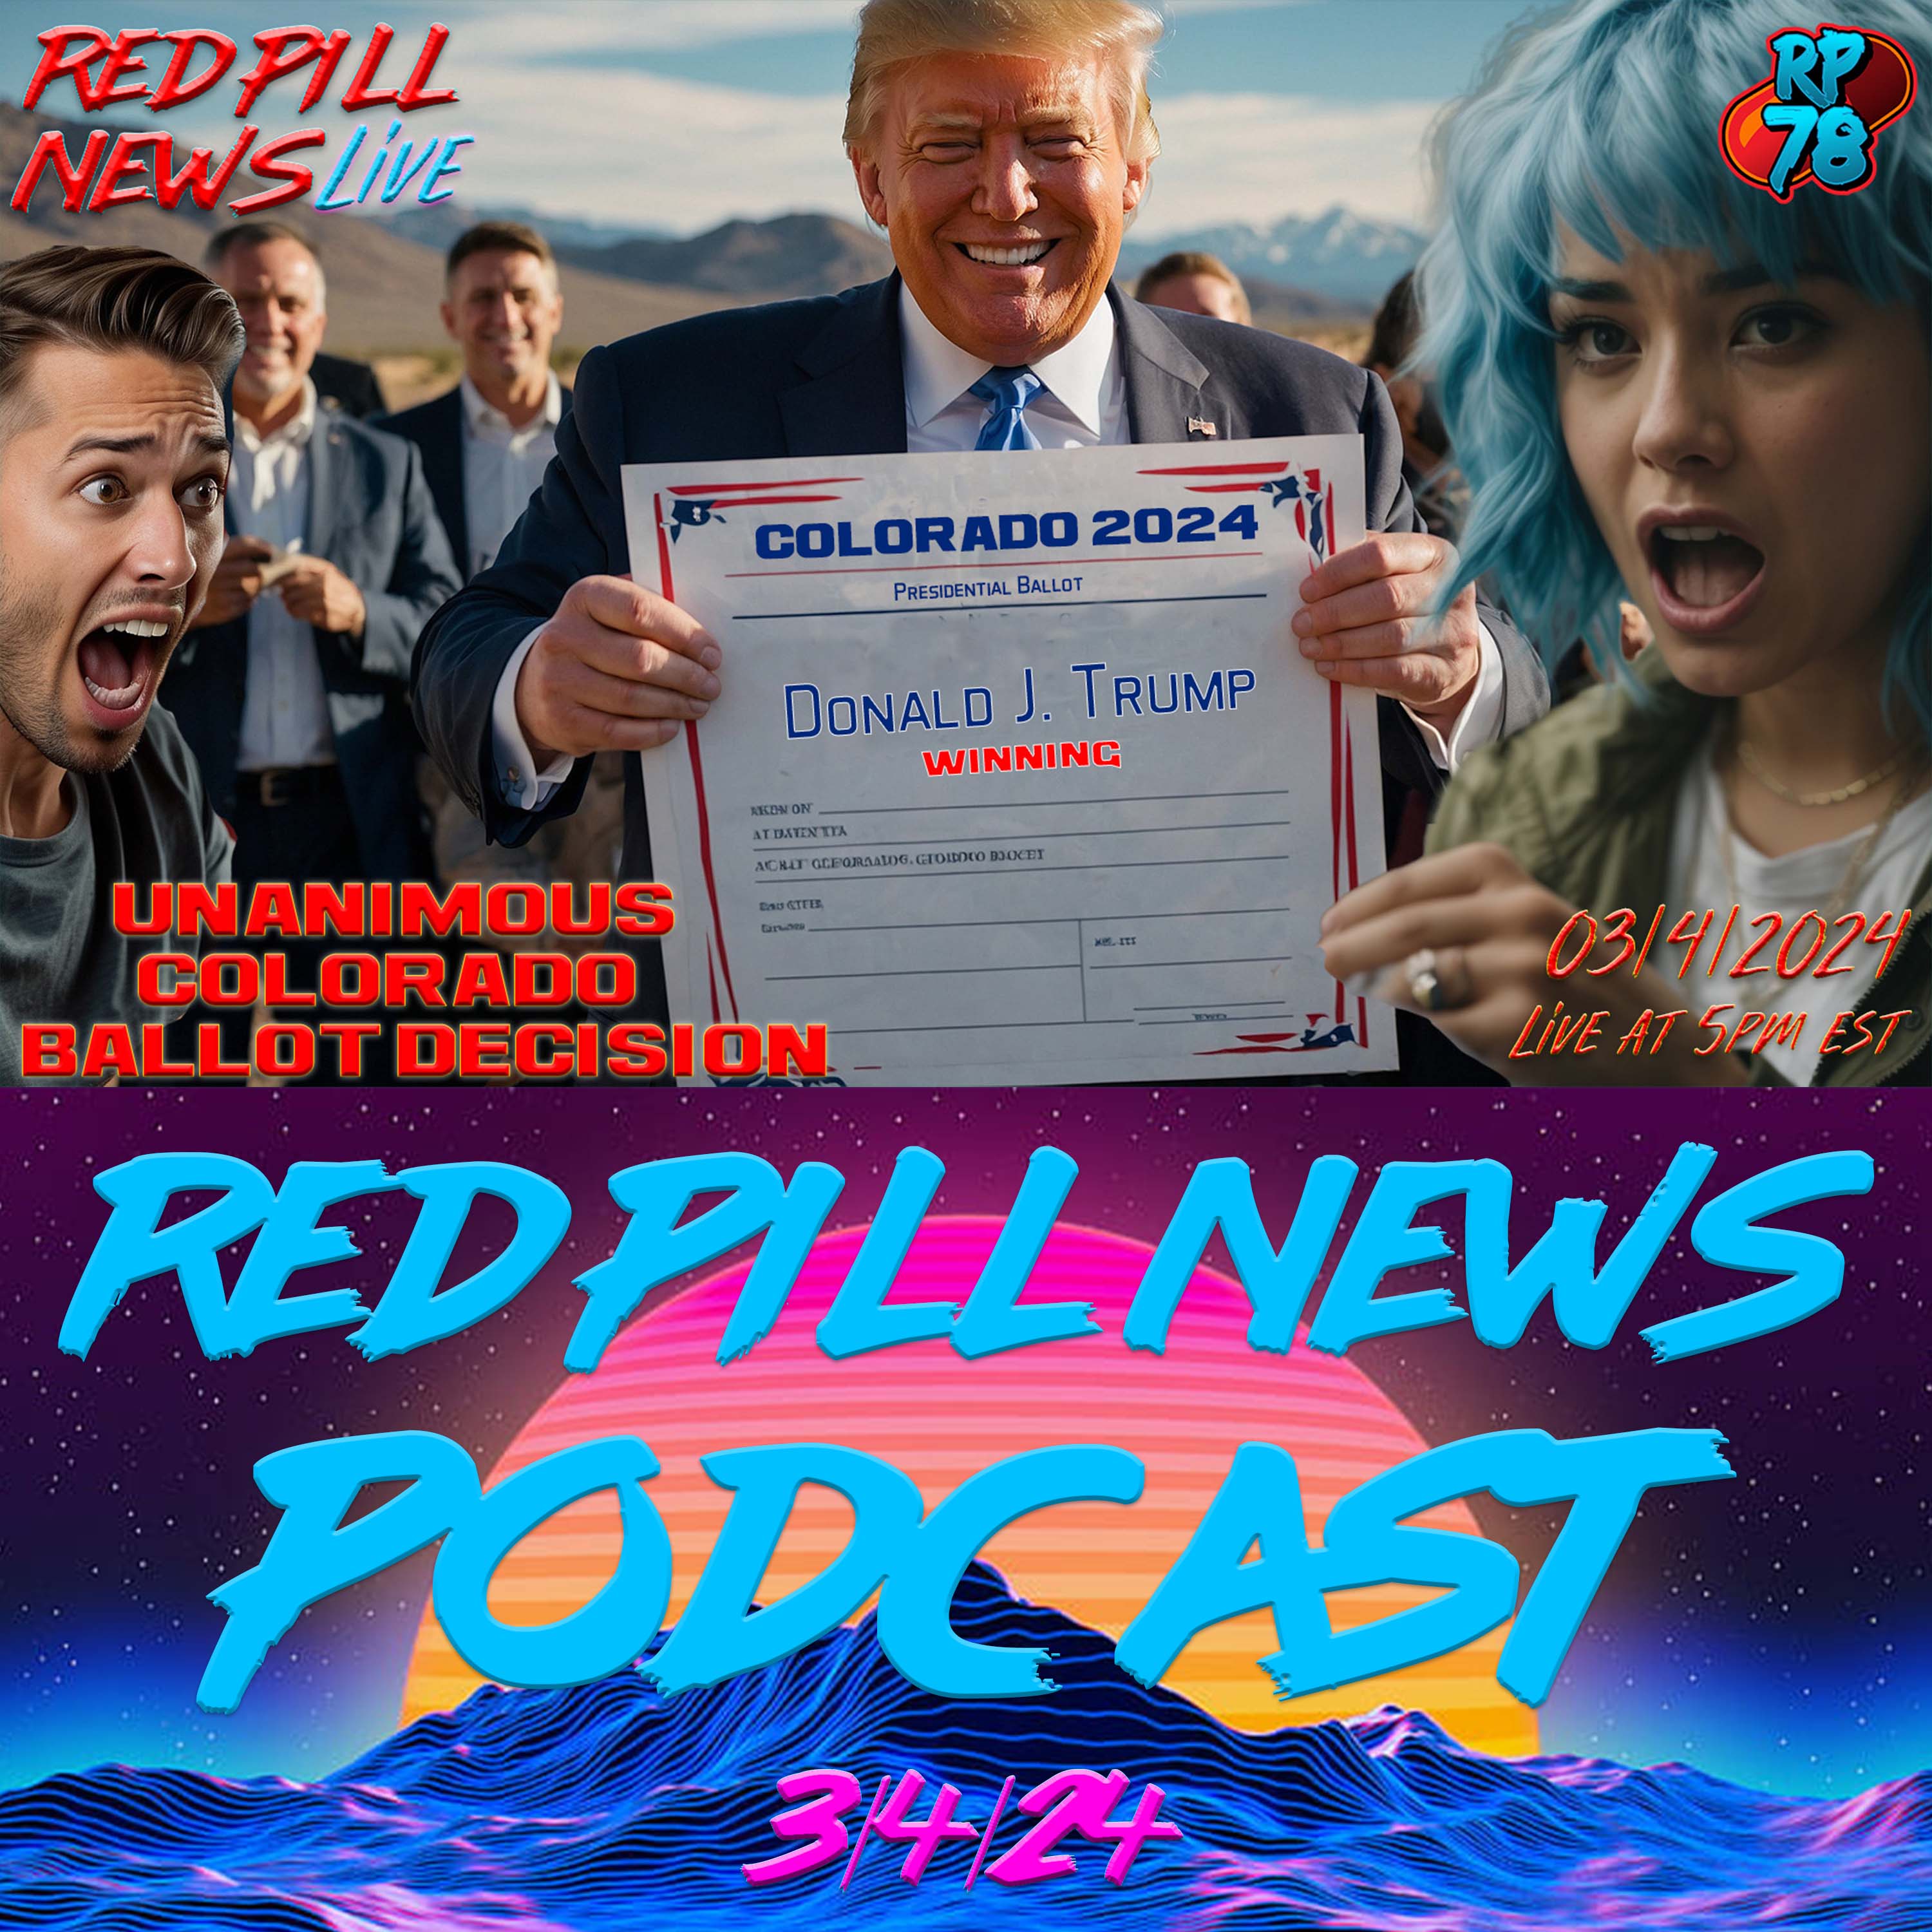 WINNING! Unanimous Blow To All Trump Ballot Challenges on Red Pill News Live